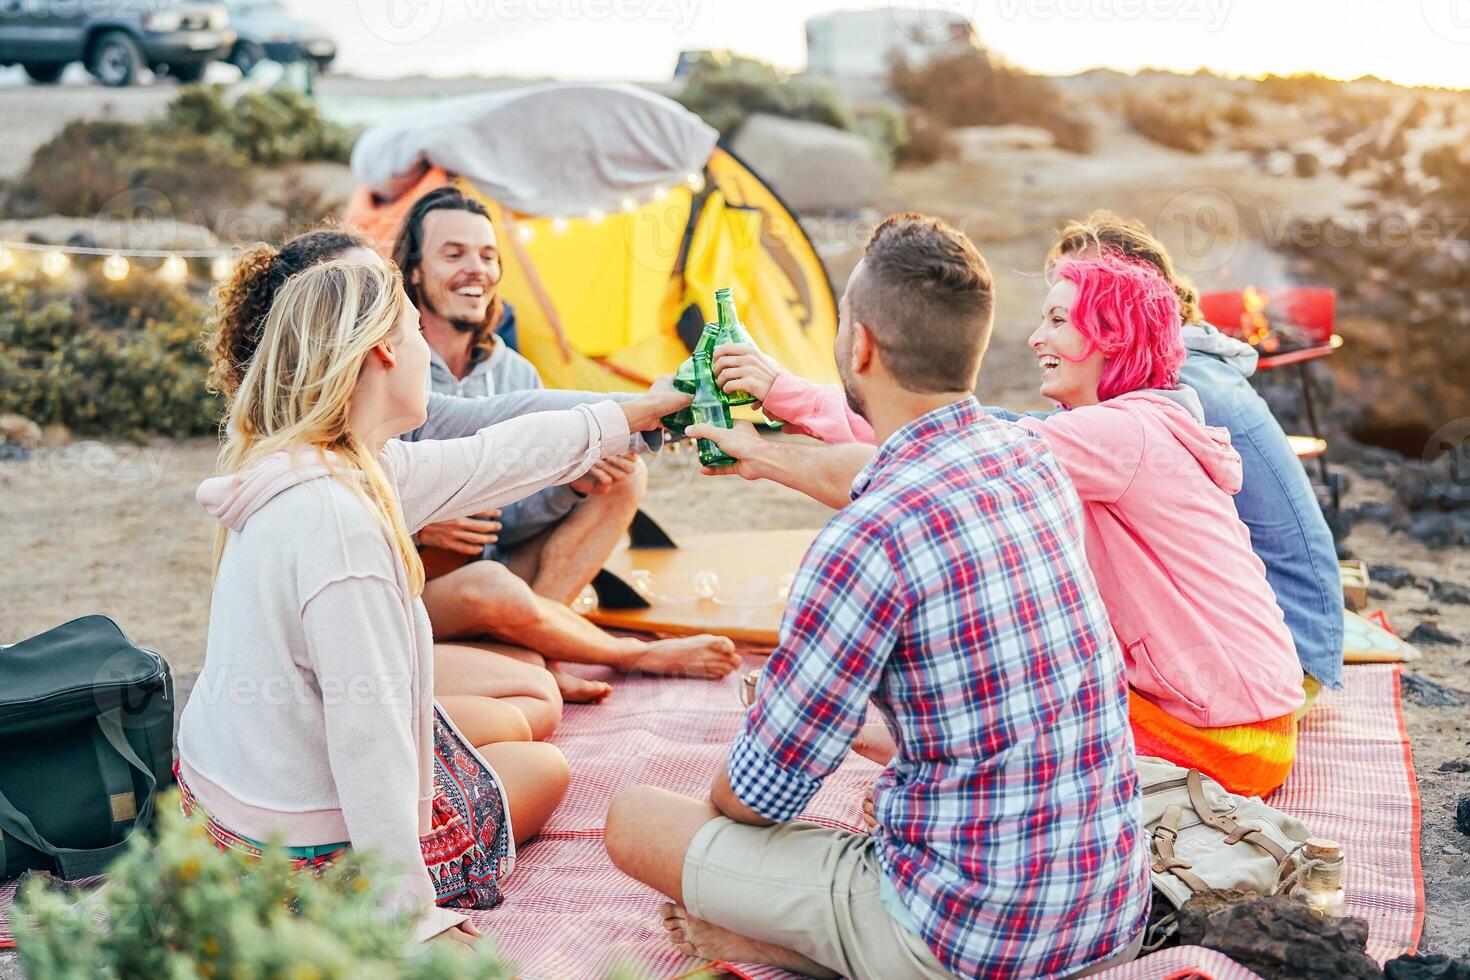 Happy friends toasting with beers at barbecue dinner on the beach - Young people camping with tent having fun cheering and drinking beer - Friendship and youth lifestyle vacation concept photo